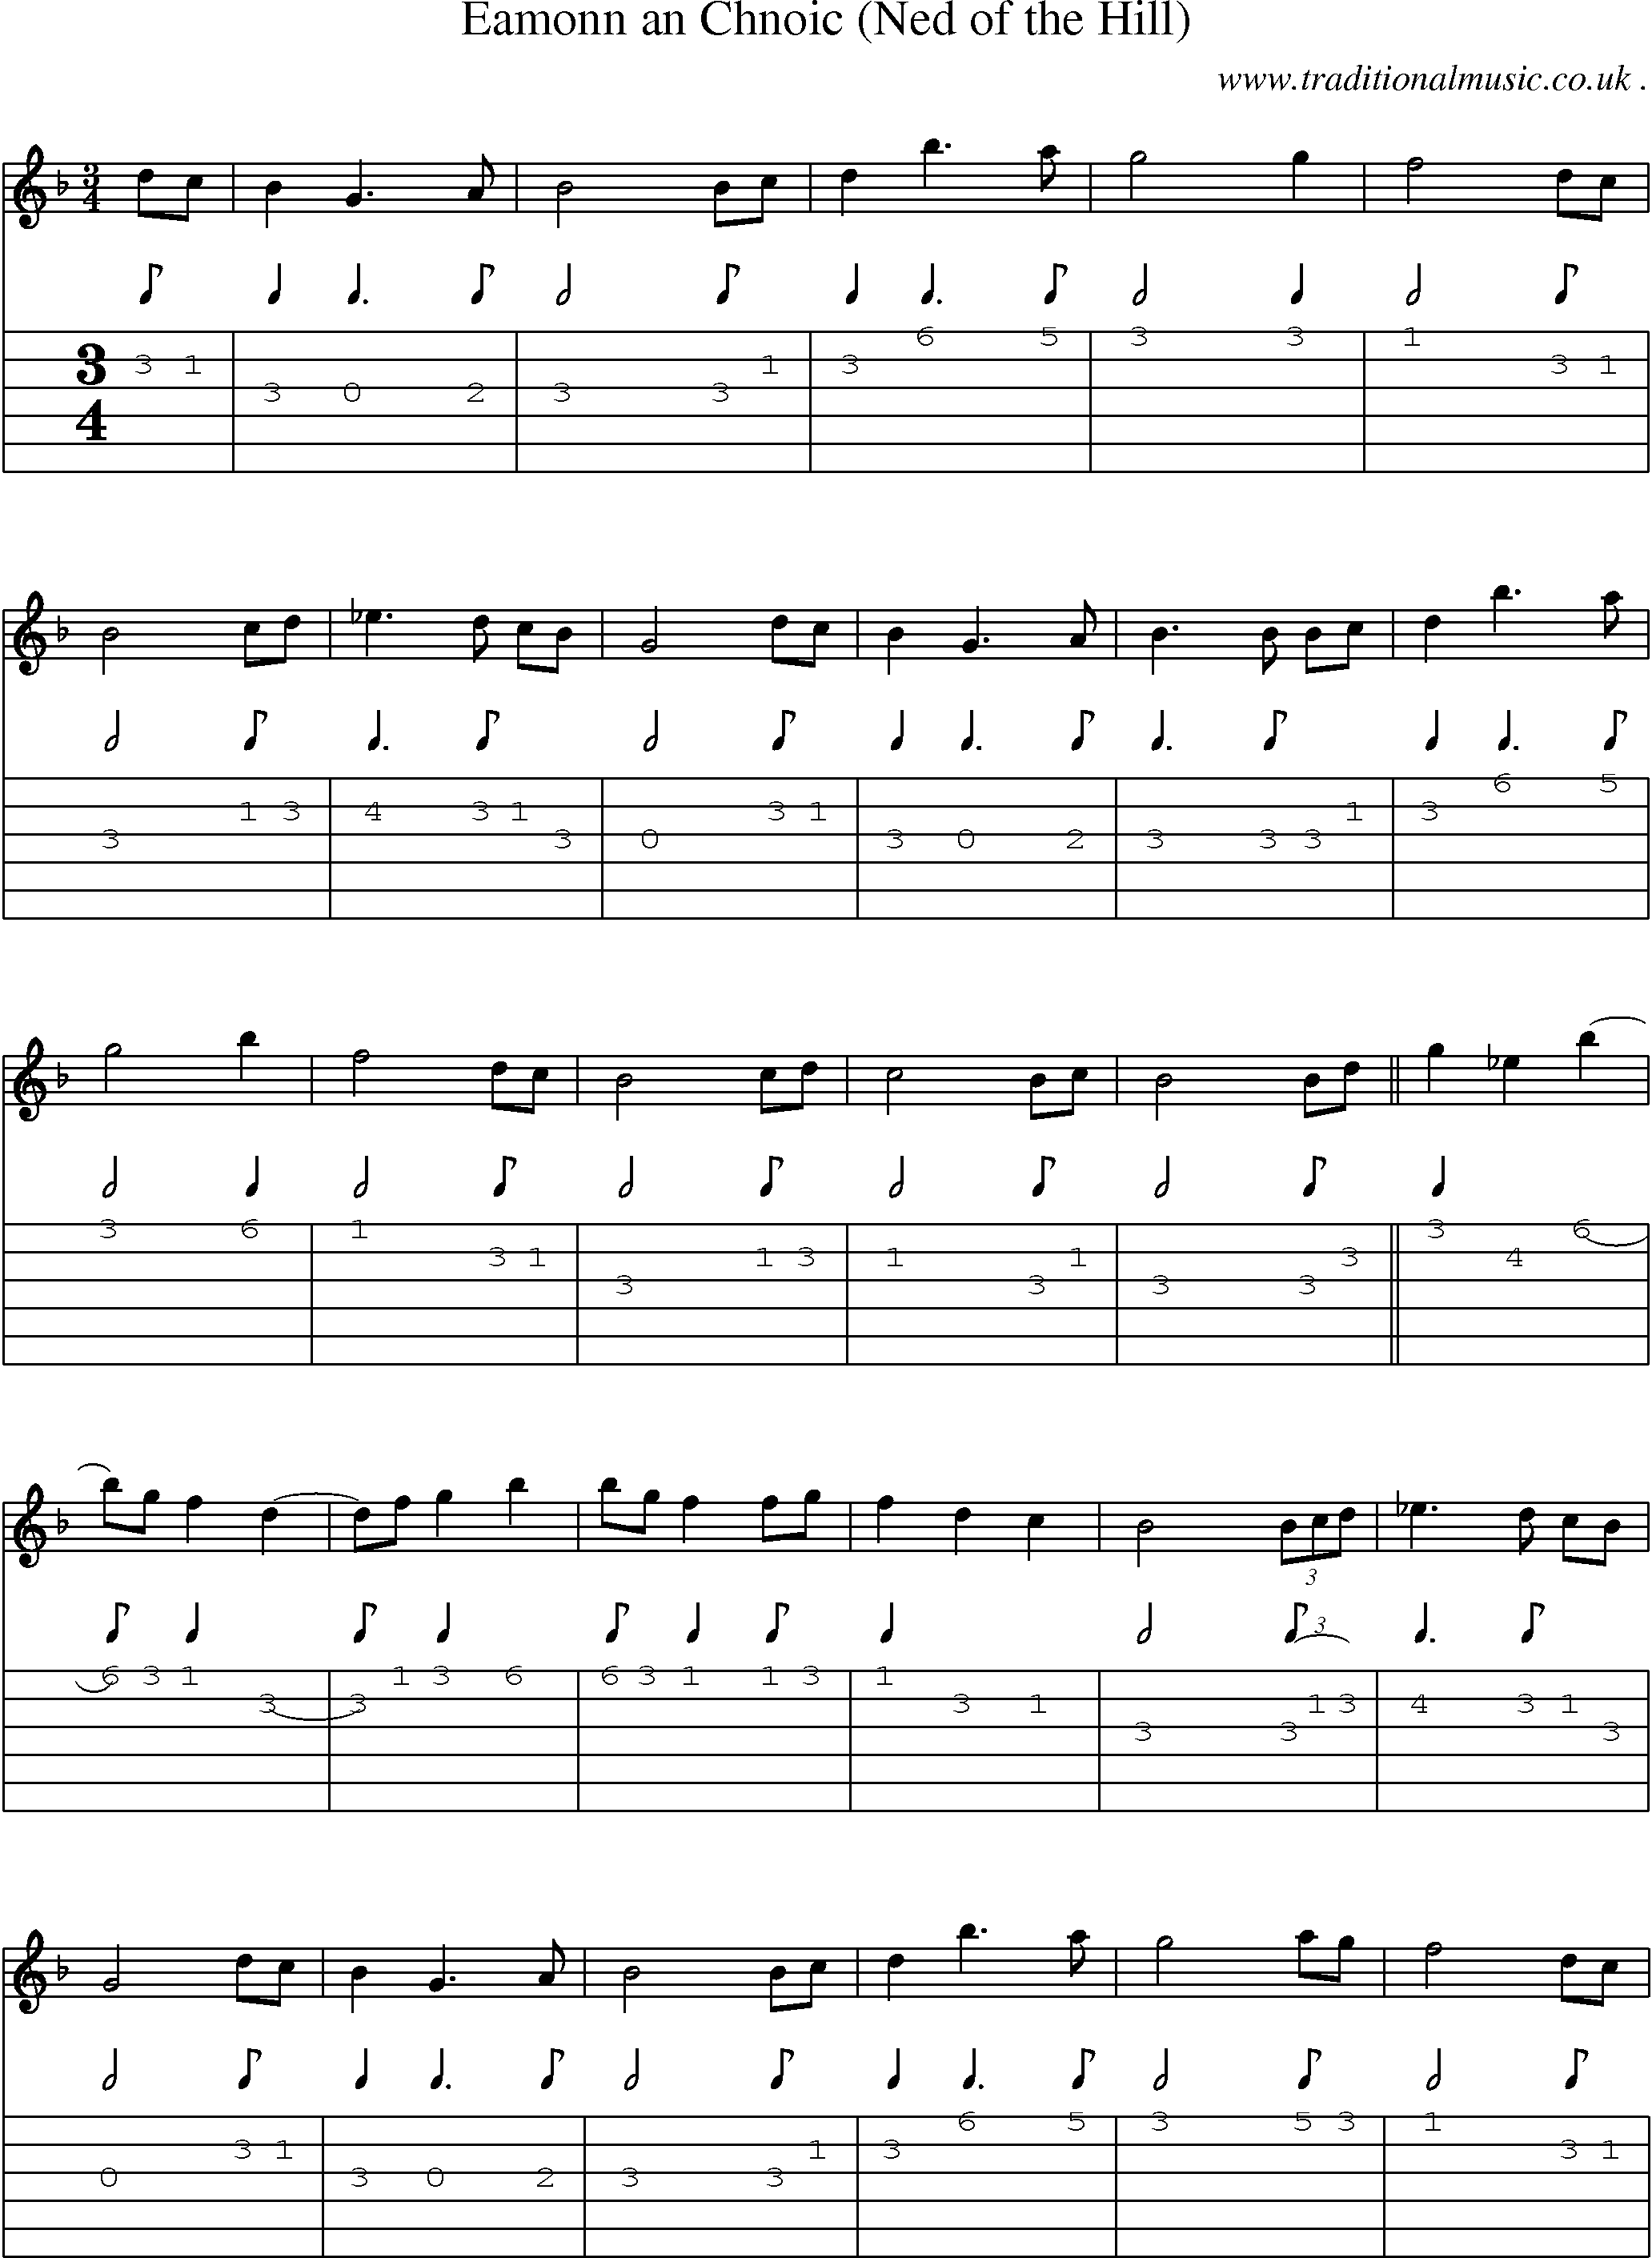 Sheet-Music and Guitar Tabs for Eamonn An Chnoic (ned Of The Hill)